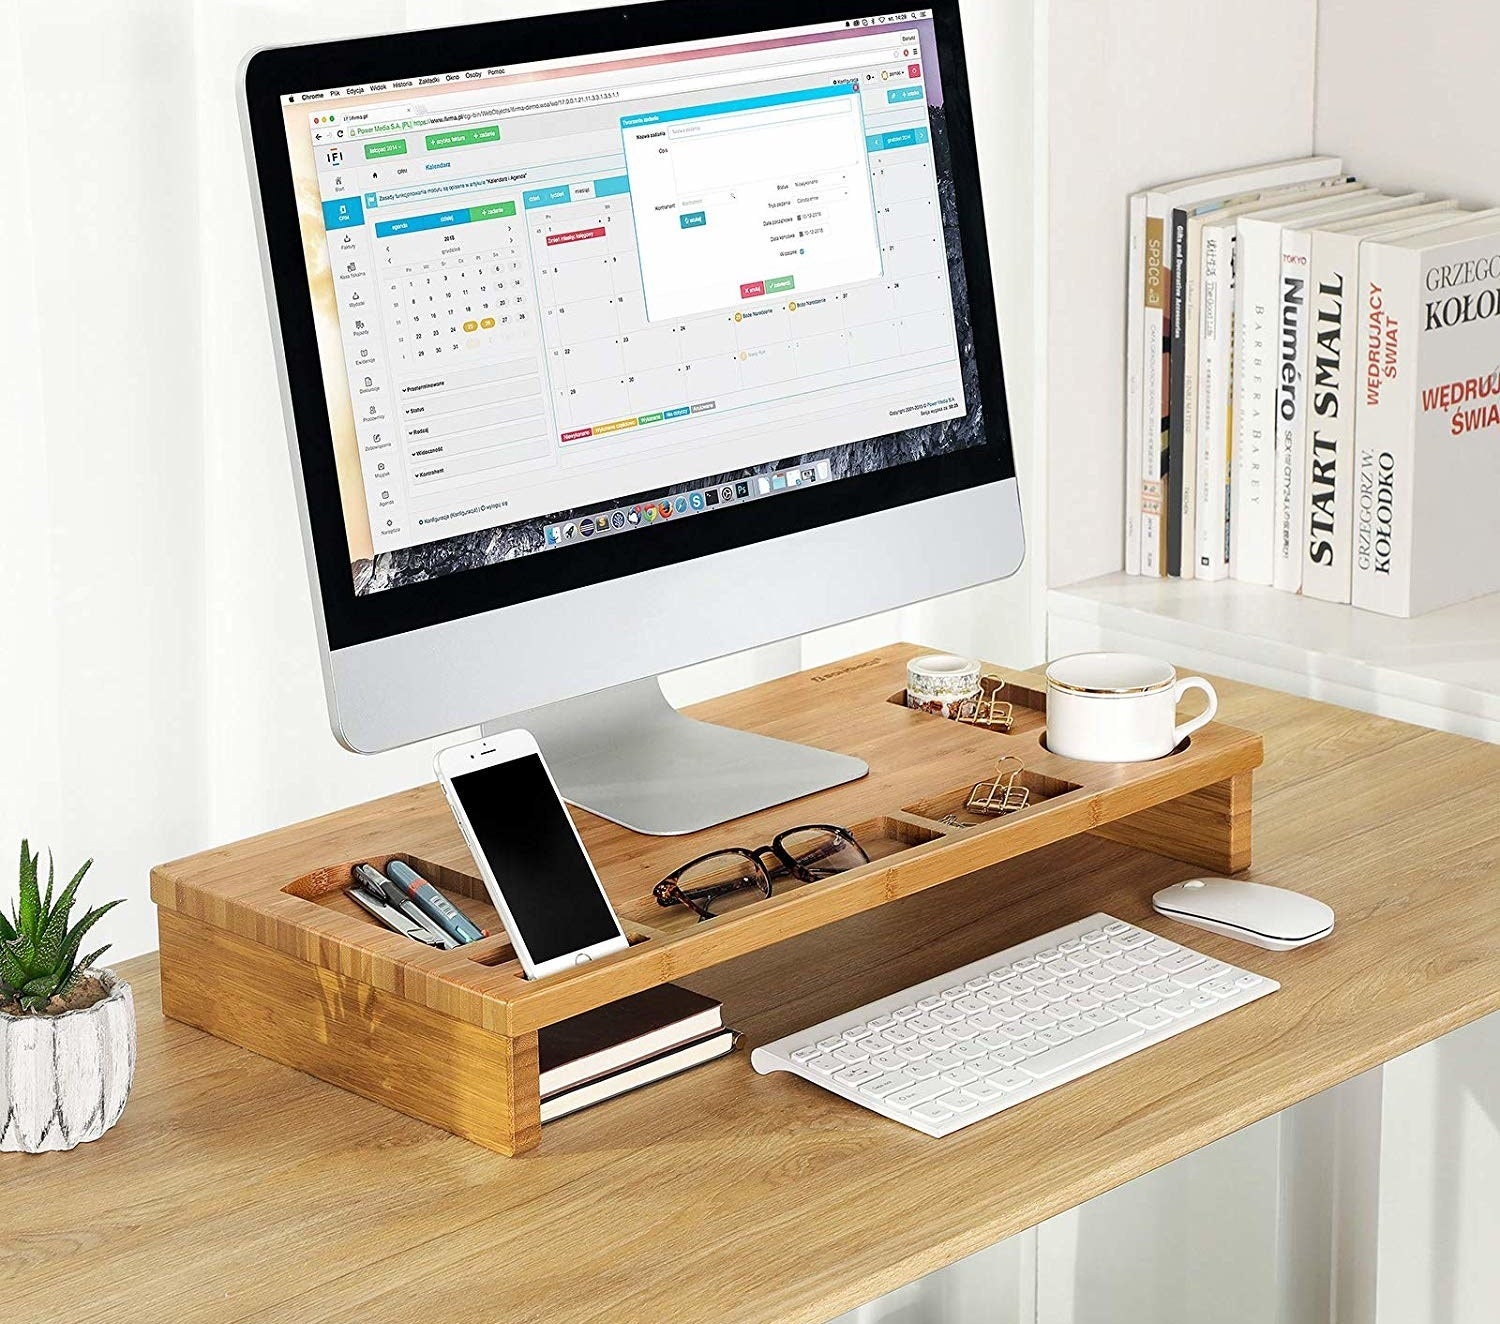 the stand rise with two storage drawers propping up a desktop and an iphone